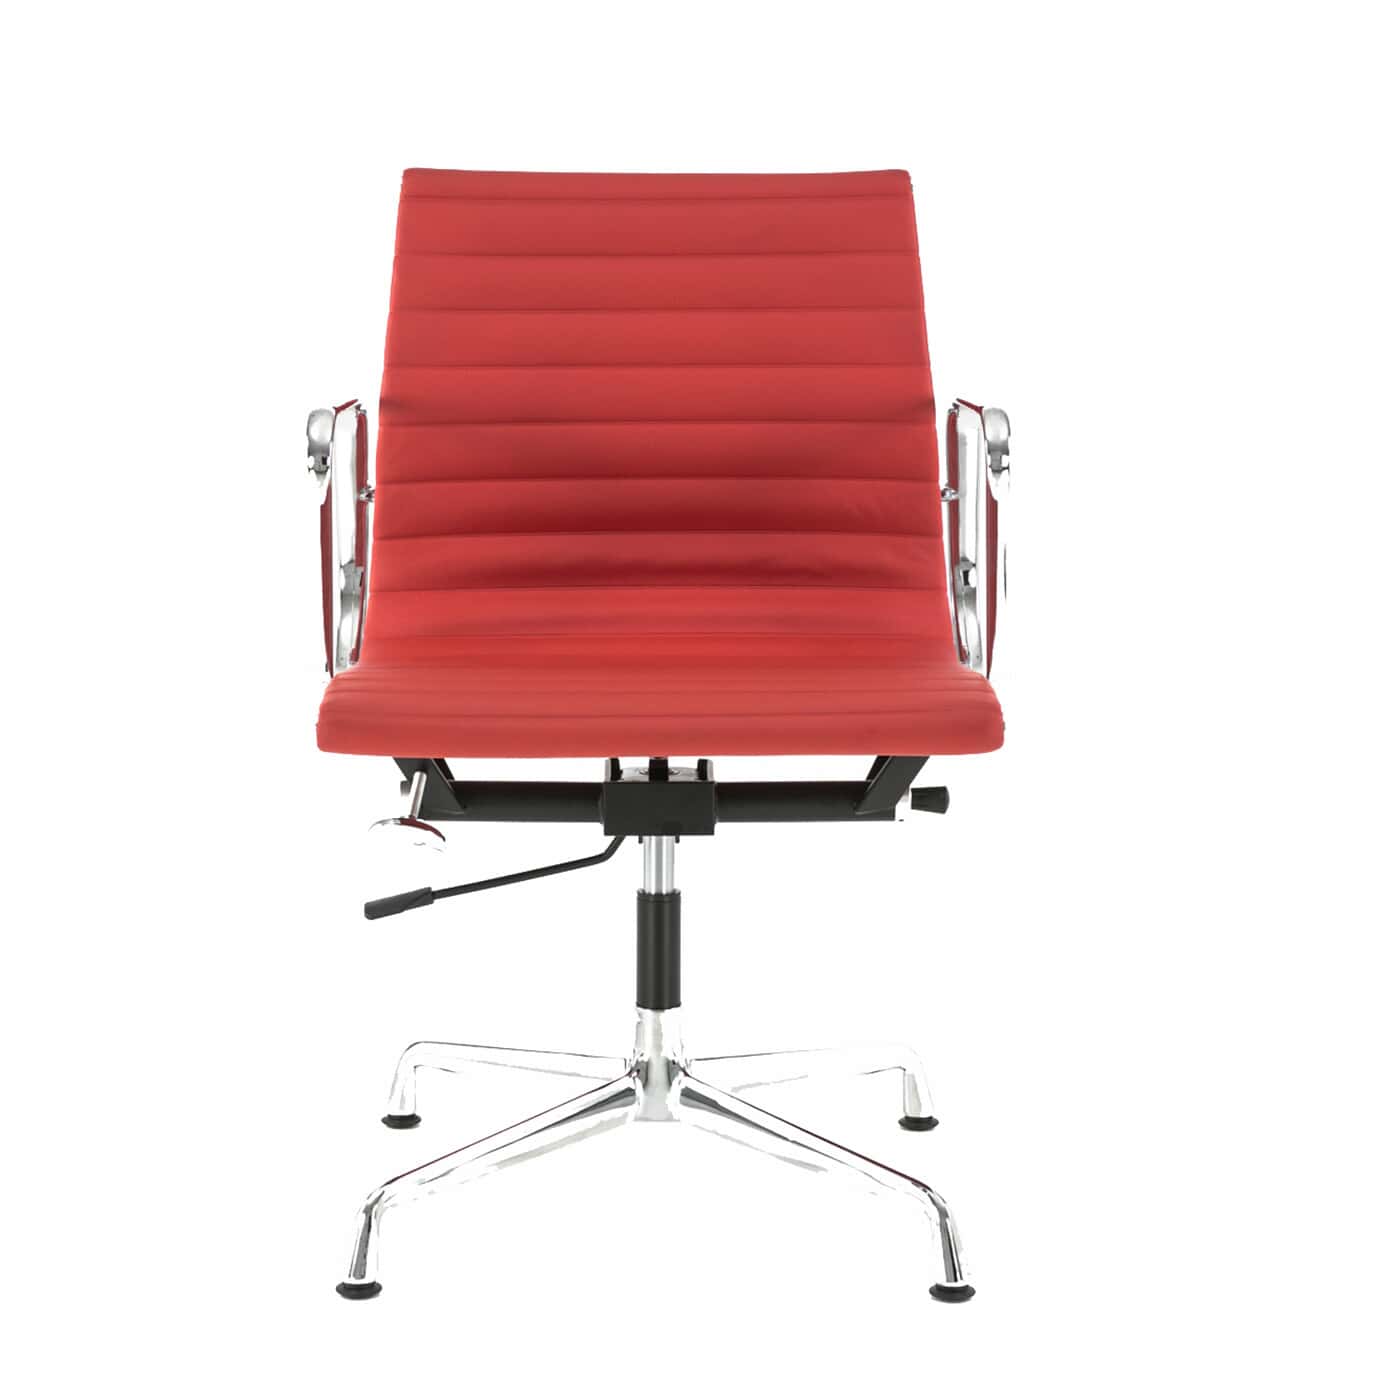 Eames Office Aluminium Chair Ea 118, Red Leather Computer Chair